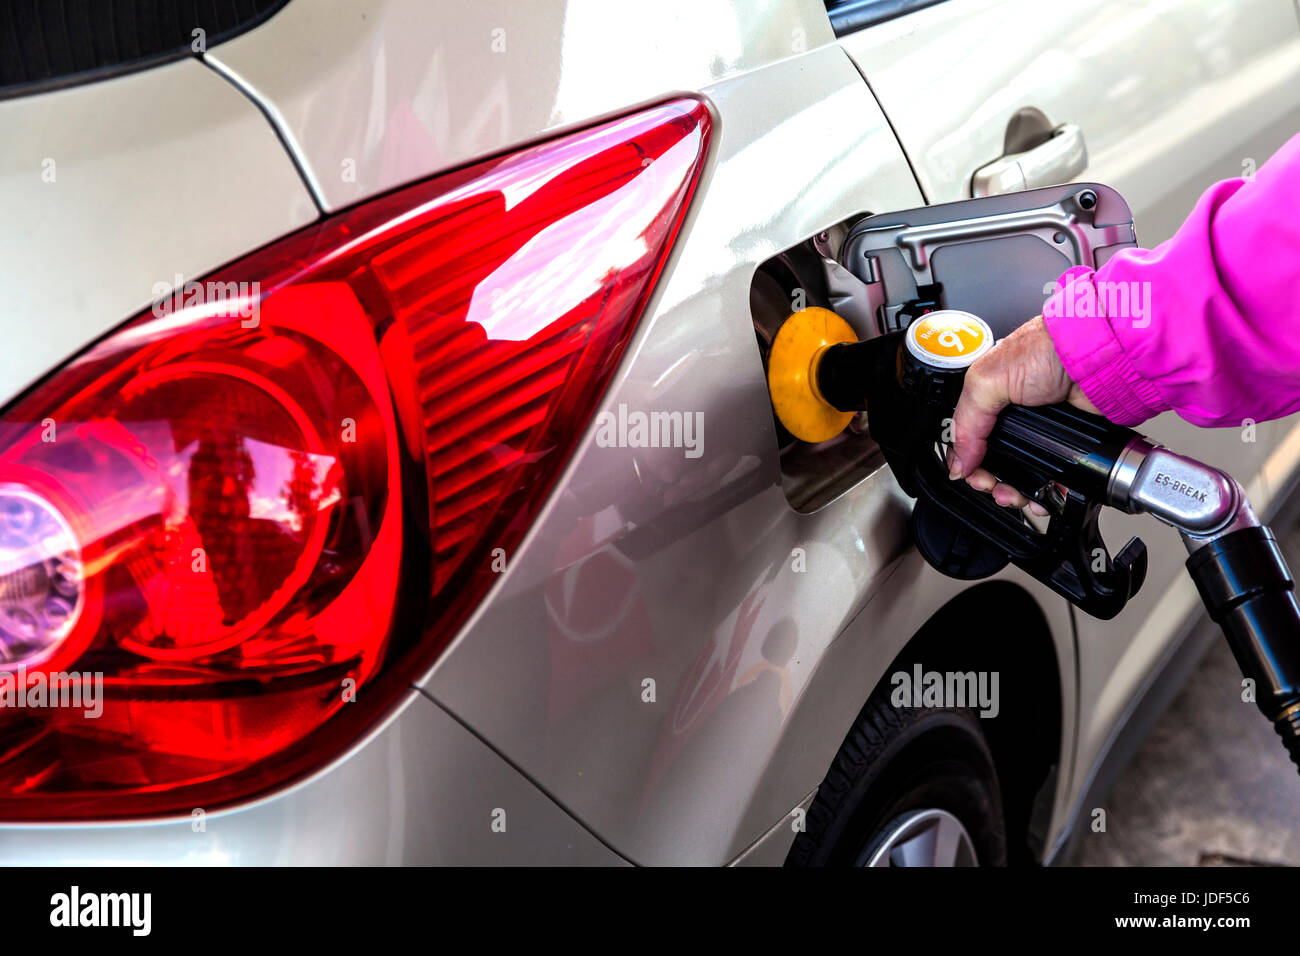 Woman filling her car with fuel at petrol station Stock Photo